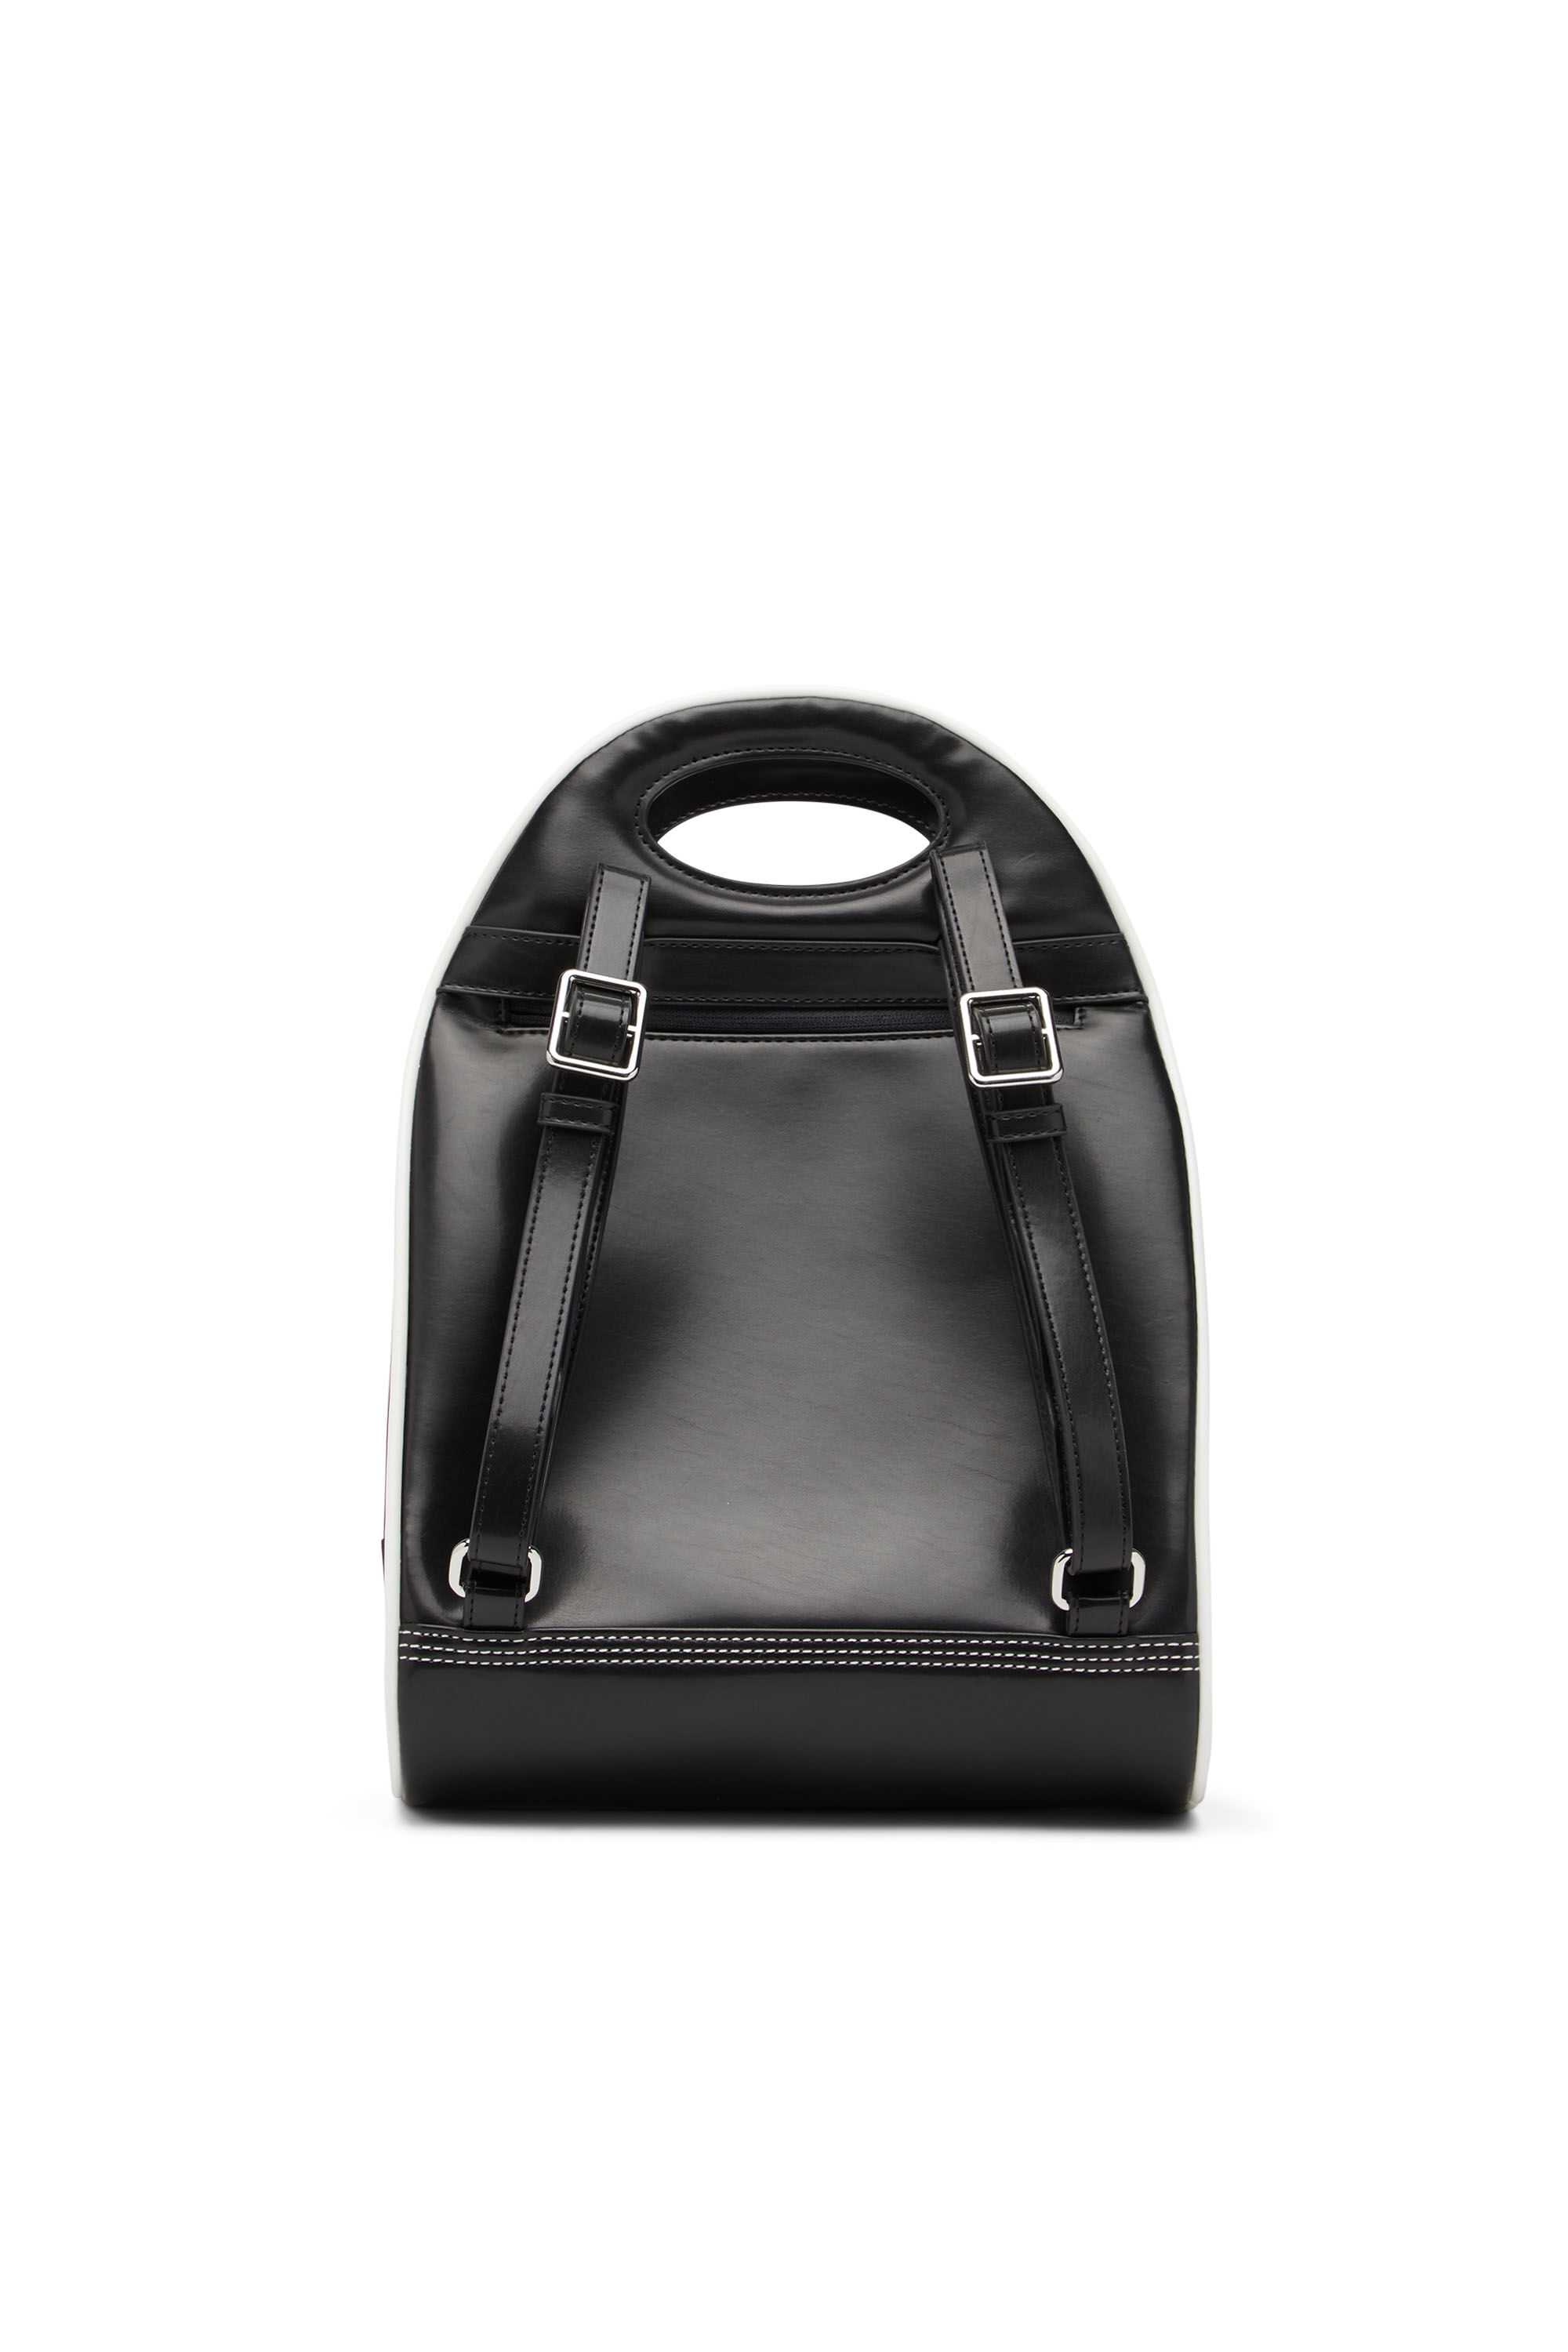 MOON-BACKPACK Woman: Backpack with cut-out handle | Diesel